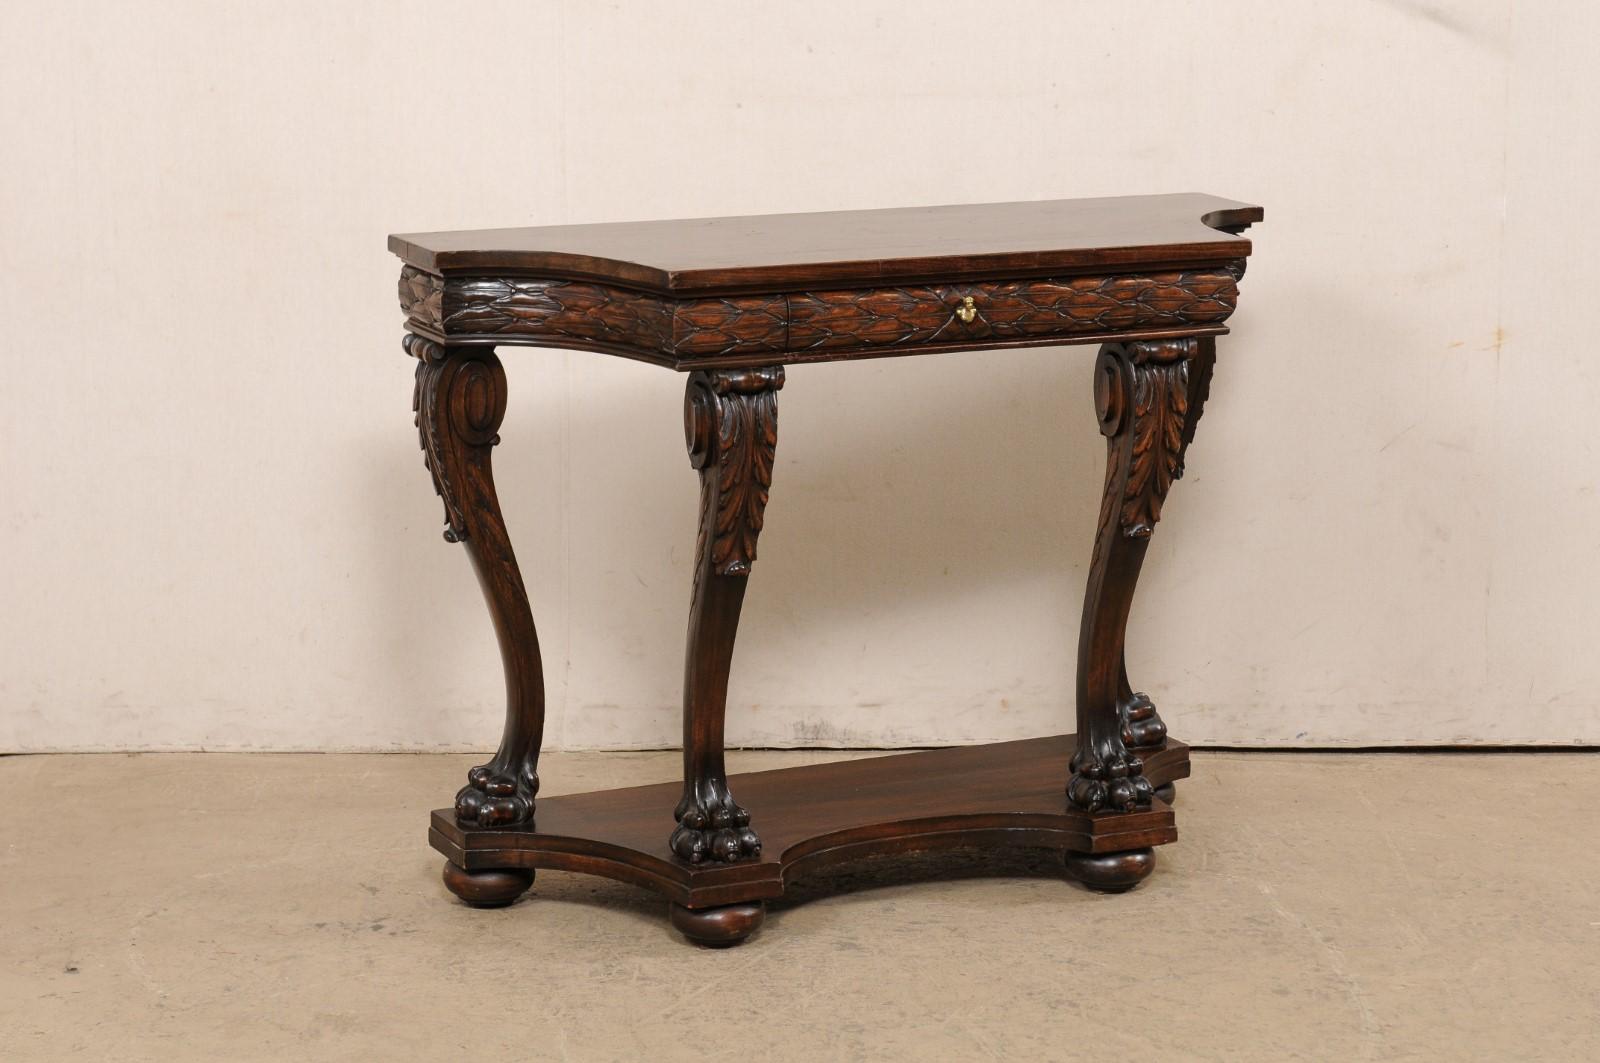 An Italian beautifully carved walnut console table, with lower tier platform shelf, from the 18th century. This antique table from Italy is comprised of rich walnut wood that has been exquisitely carved in a foliate motif about the apron, and its